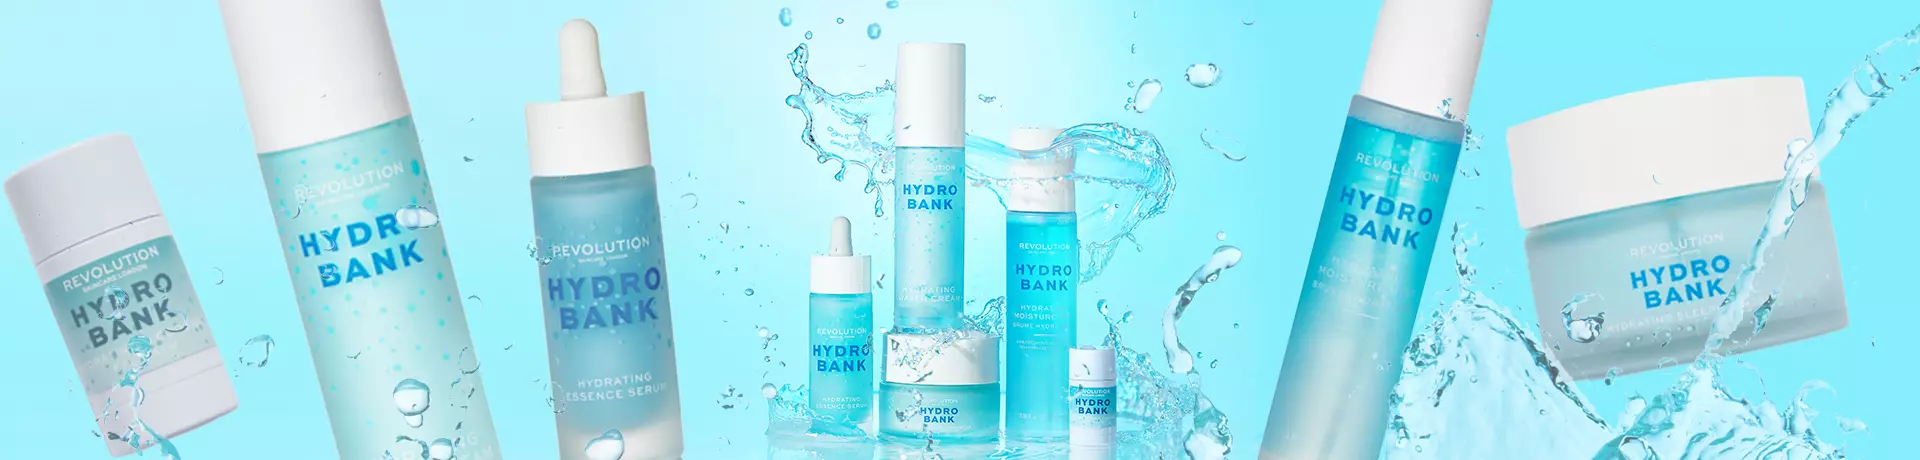 Thirsty Skin? Try Hydro Bank